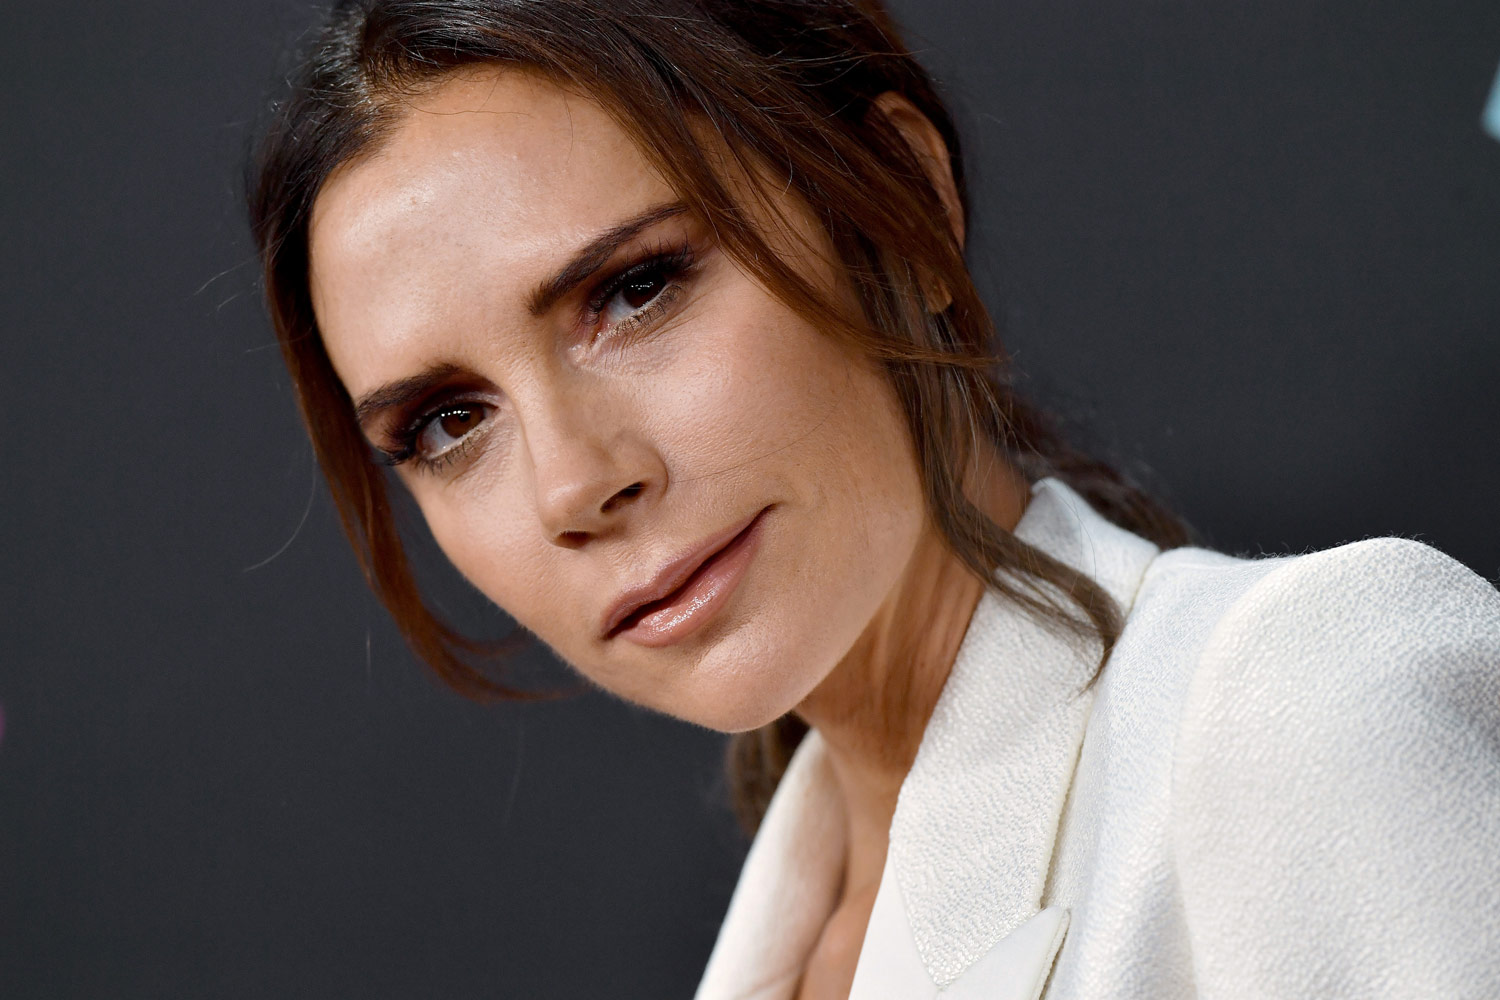 Victoria Beckham’s Approach To Parenting Is Something We All Need To Follow